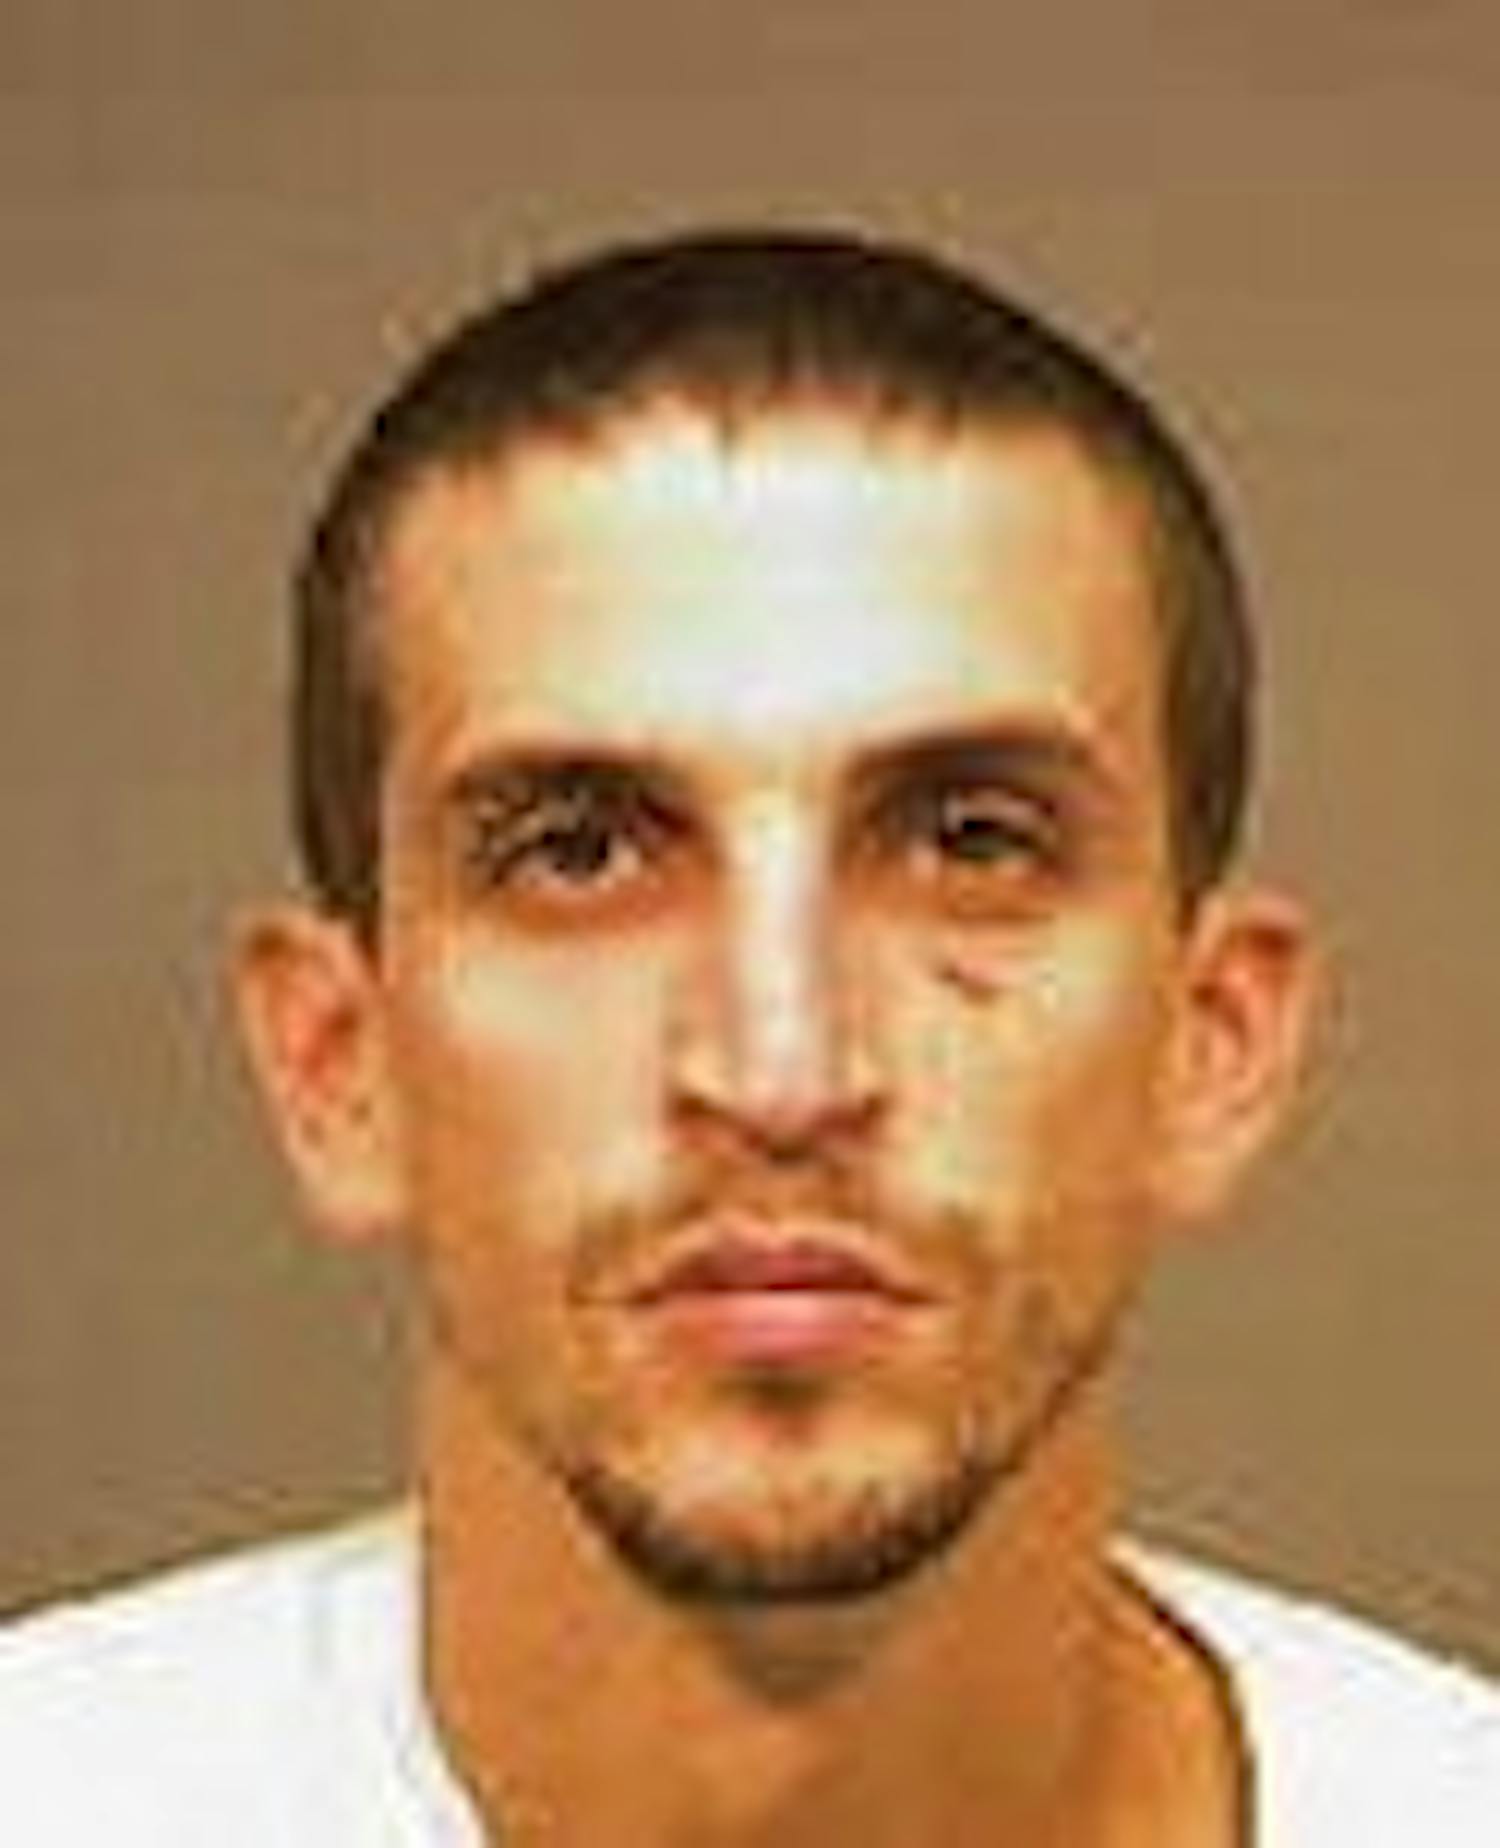 Albany man gets 4 years for crimes  